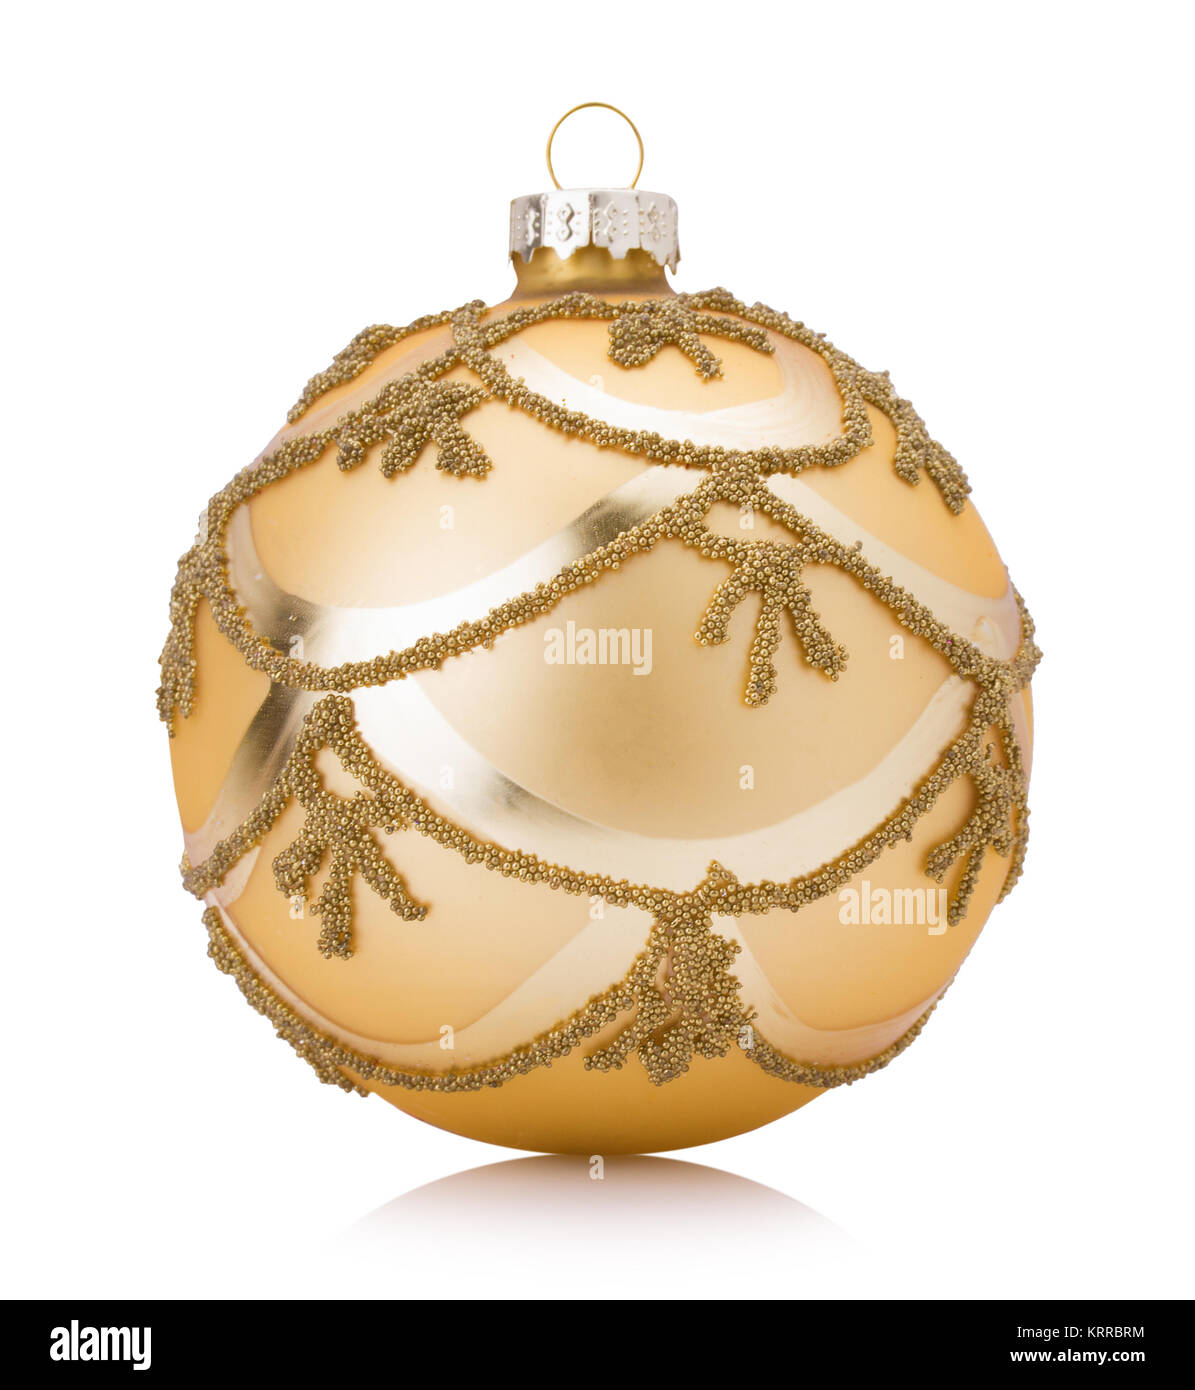 golden Christmas tree ball isolated on a white background. Stock Photo